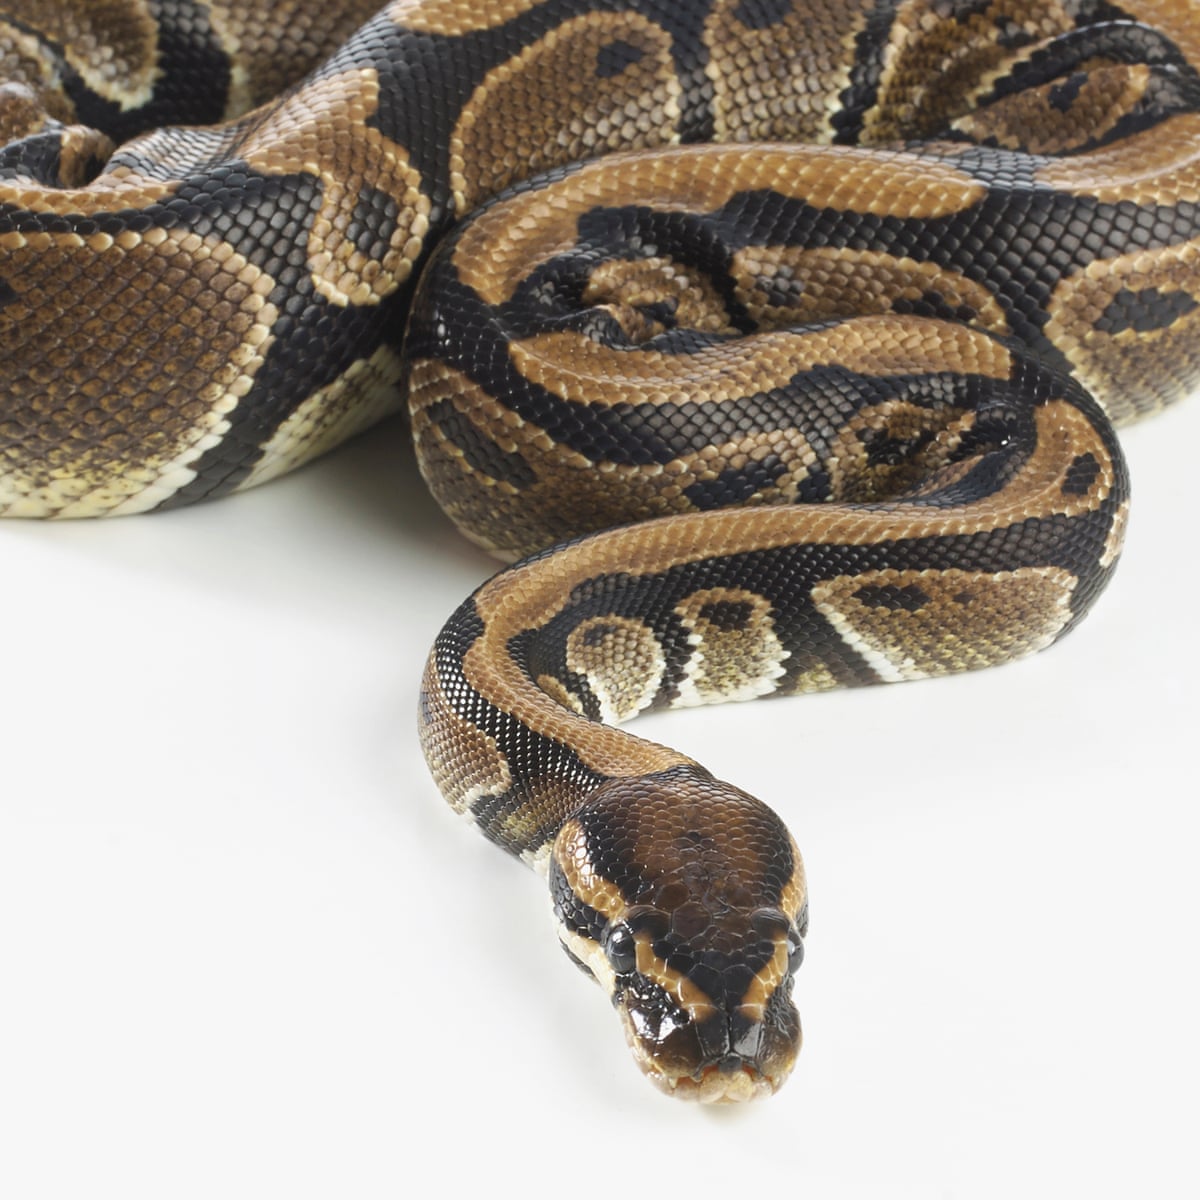 Scottish animal welfare baffled by python mutilation in Aberdeen | Snakes |  The Guardian